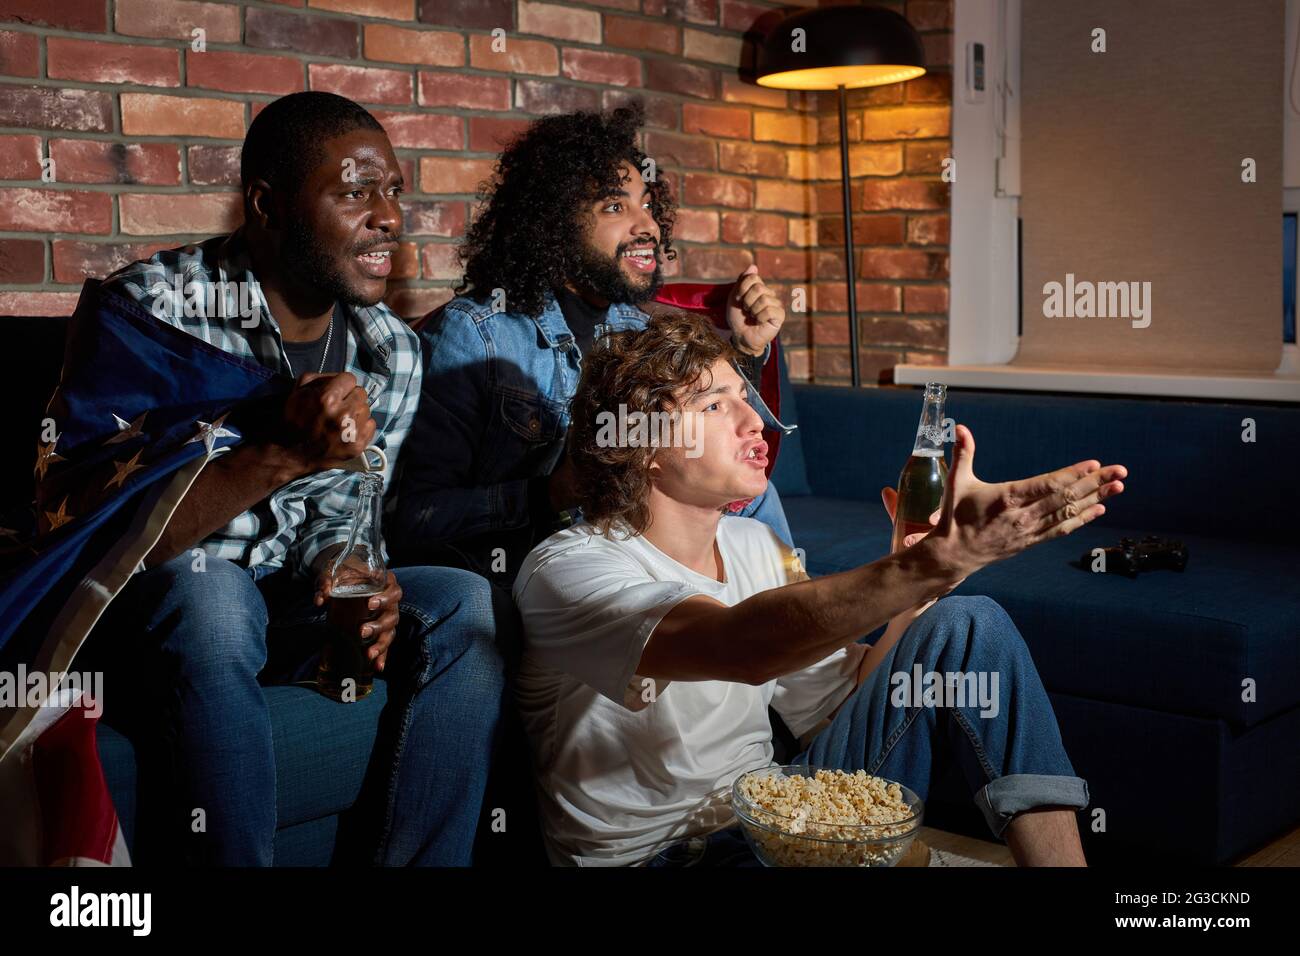 Group Of Diverse Men Sitting On Sofa Watching Sport Championship Together Emotionally Reacting On Game Process, Gesturing, Drinking Beer, At Home Stock Photo